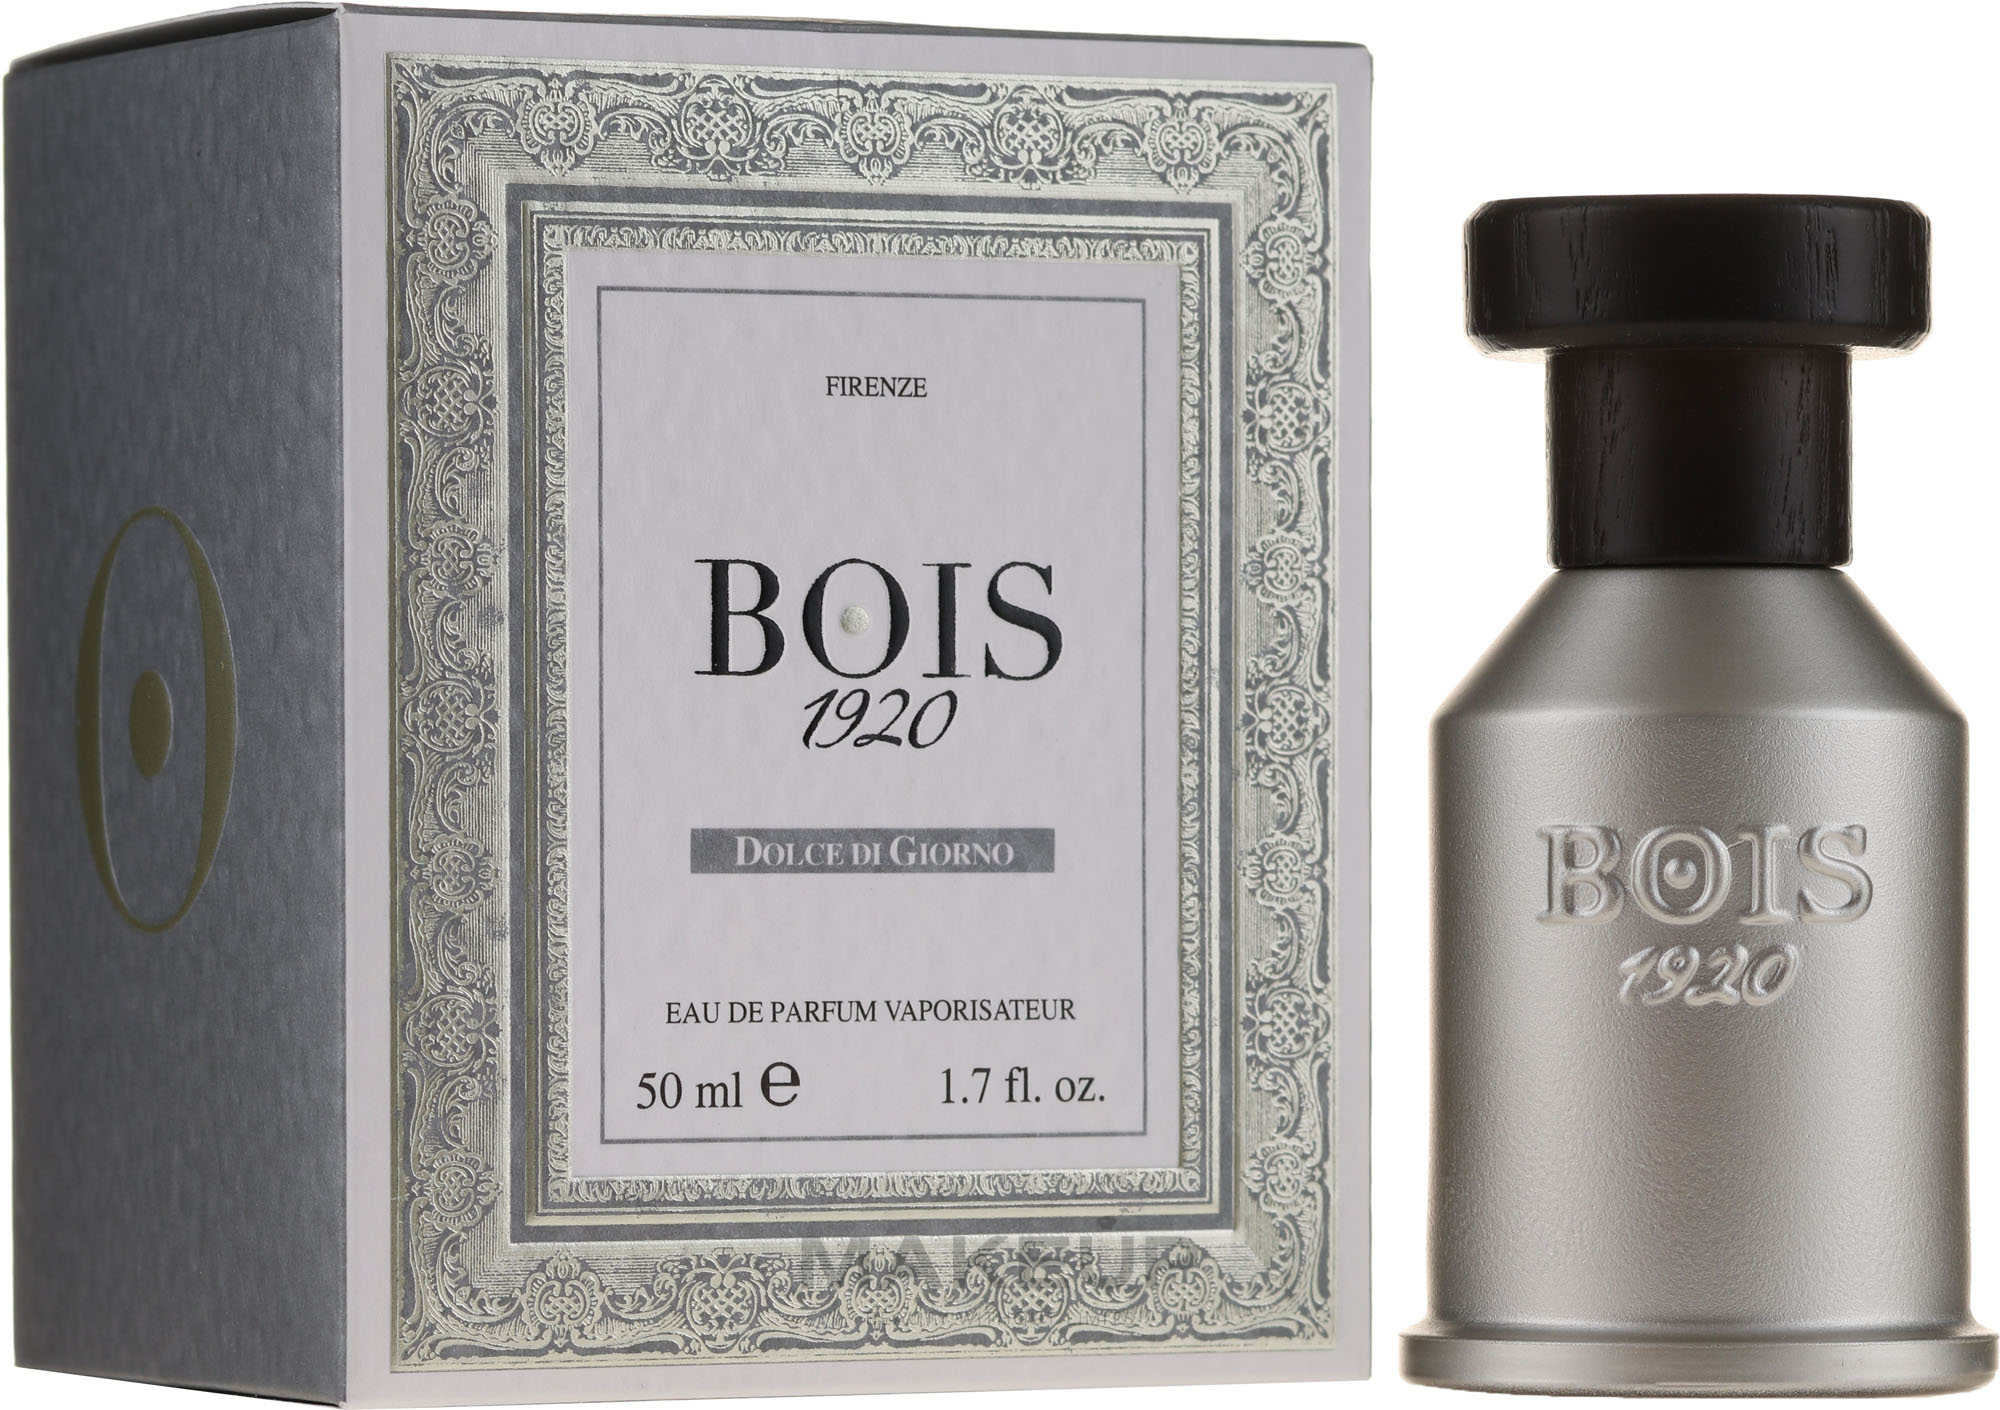 Bois 1920 Dolce di Giorno Limited Art Collection - Парфюмированная вода — фото 50ml